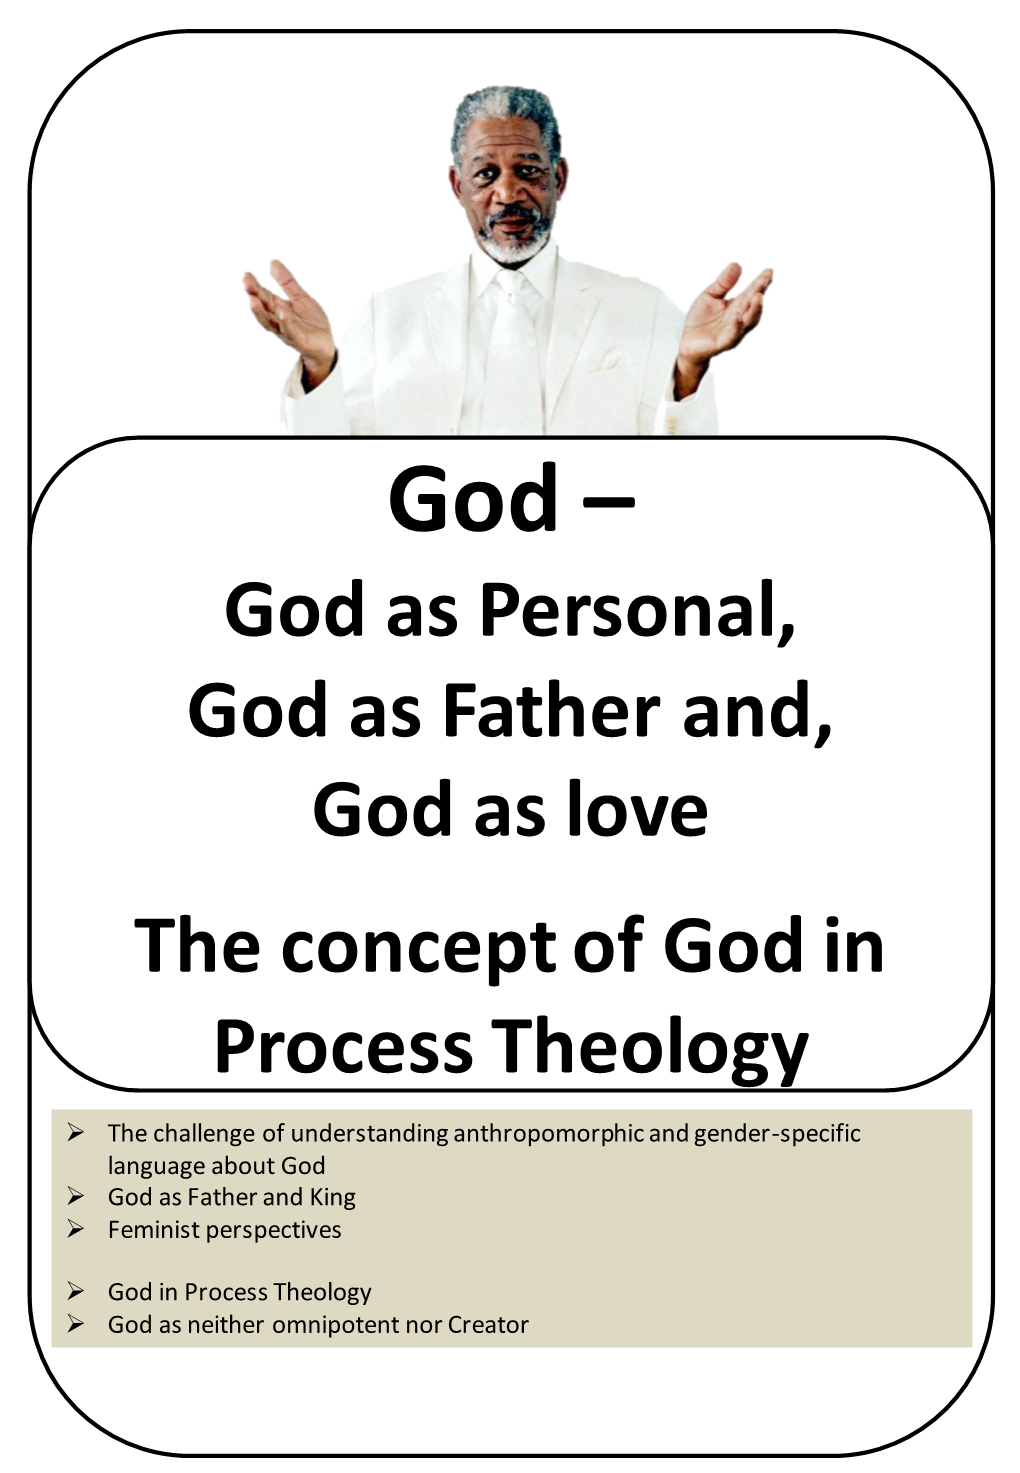 God – God As Personal, God As Father And, God As Love the Concept of God in Process Theology